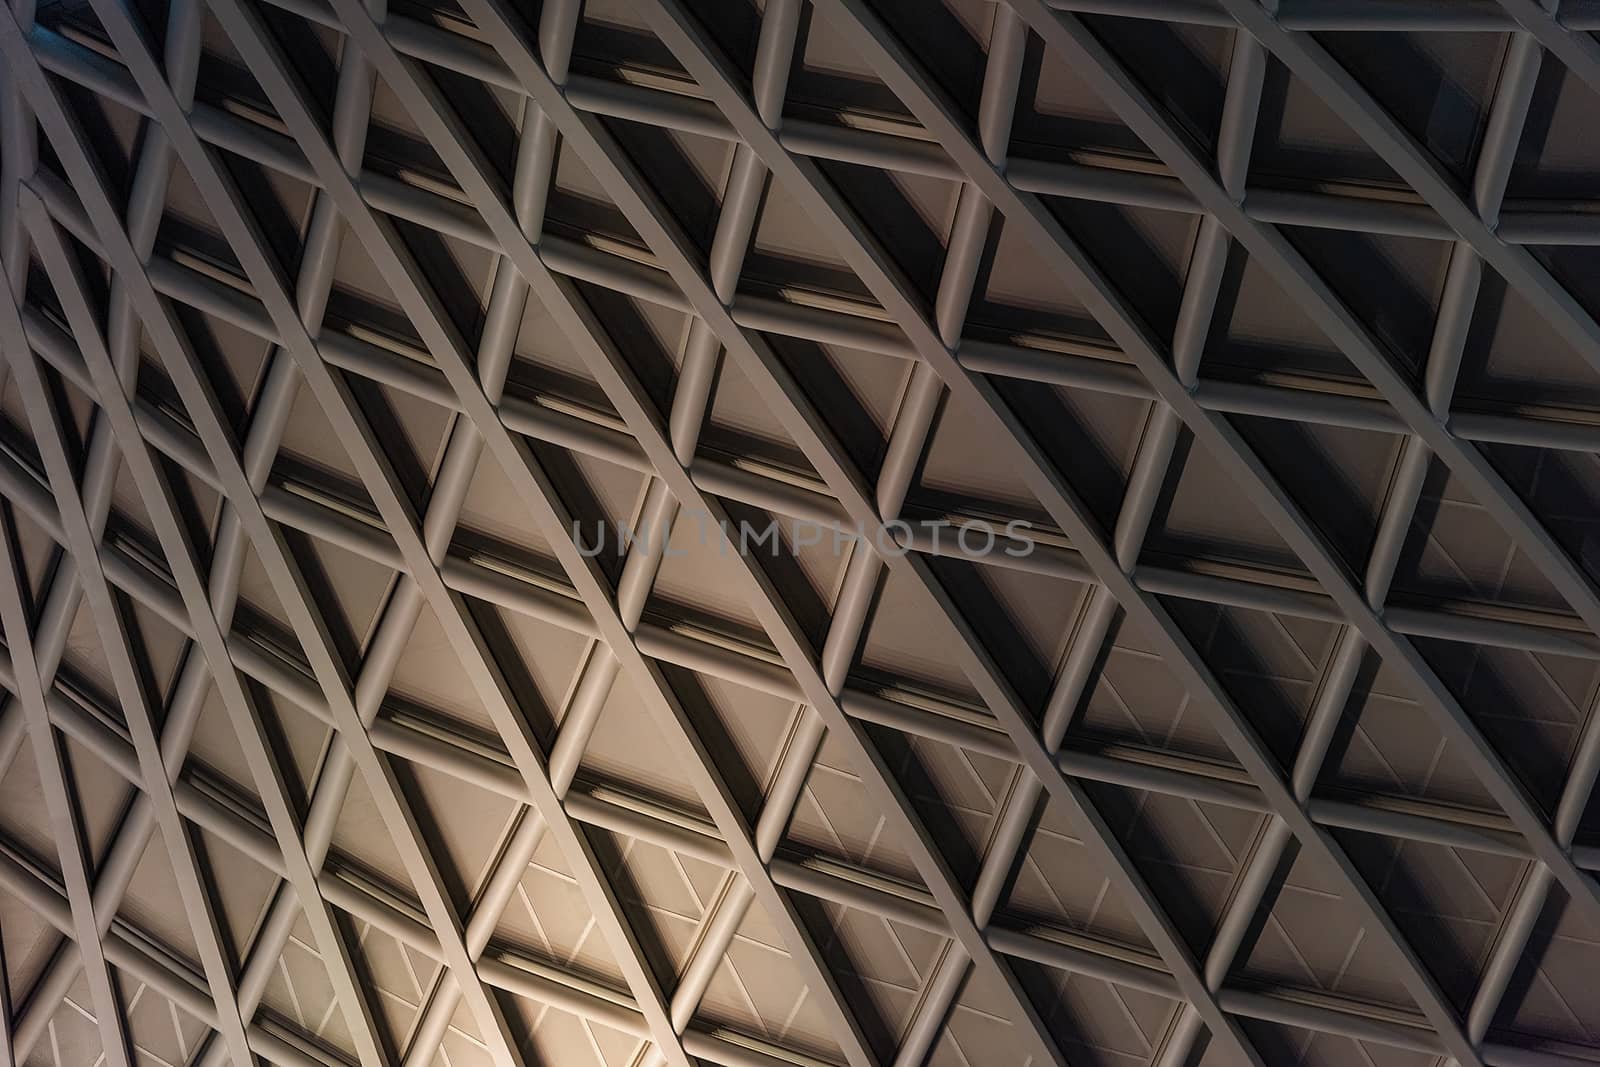 London, UK - Jan 2020:  The contemporary lattice ceiling of King's Cross railway station concourse, designed by John McAslan and partners. King's Cross station is a major transport hub.